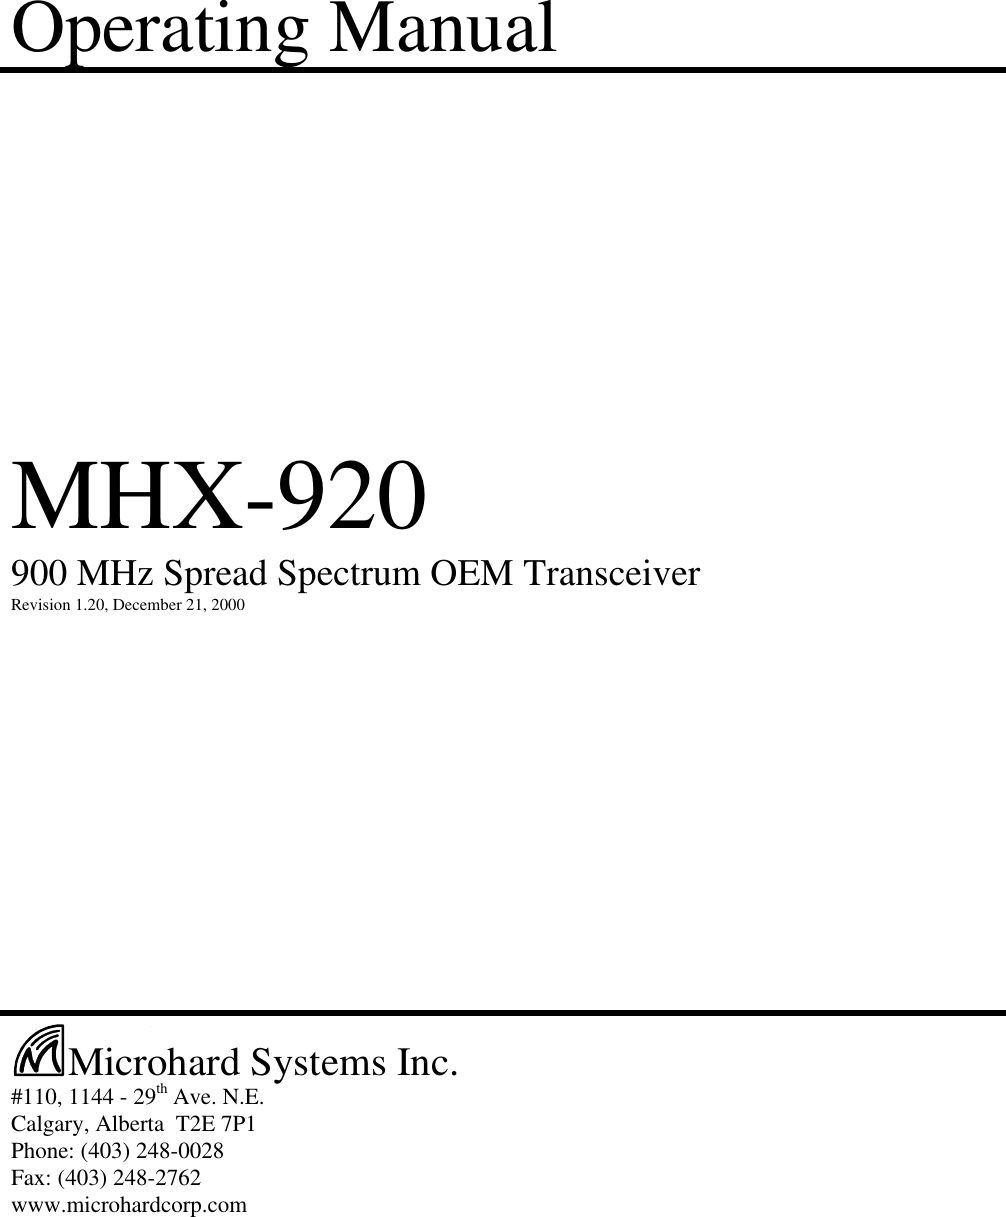 Operating ManualMHX-920900 MHz Spread Spectrum OEM TransceiverRevision 1.20, December 21, 2000Microhard Systems Inc.#110, 1144 - 29th Ave. N.E.Calgary, Alberta  T2E 7P1Phone: (403) 248-0028Fax: (403) 248-2762www.microhardcorp.com